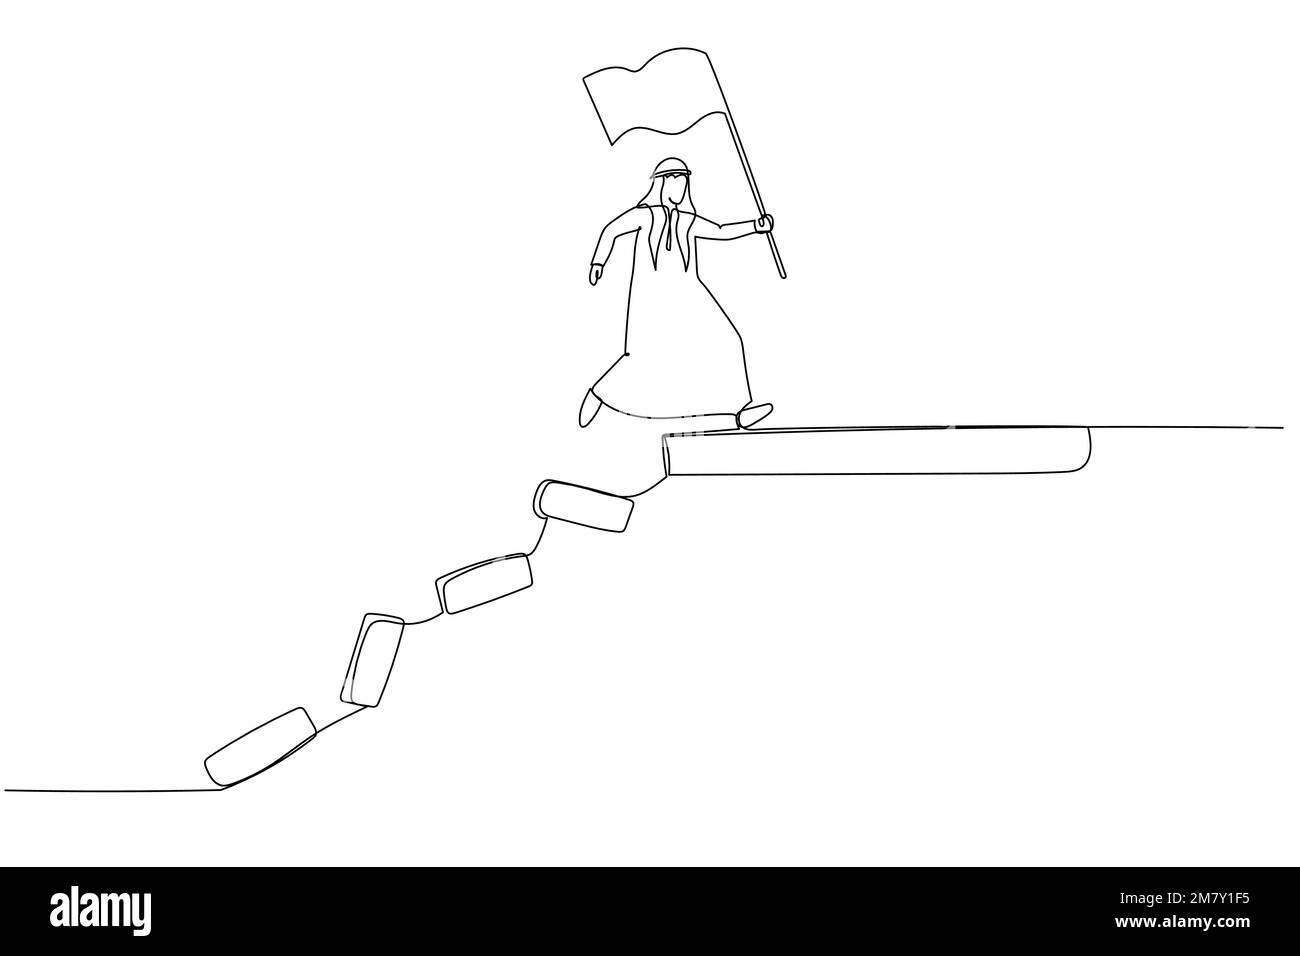 Cartoon of arab man jumping on collapse bridge to reach target concept of survival. One continuous line art style design Stock Vector